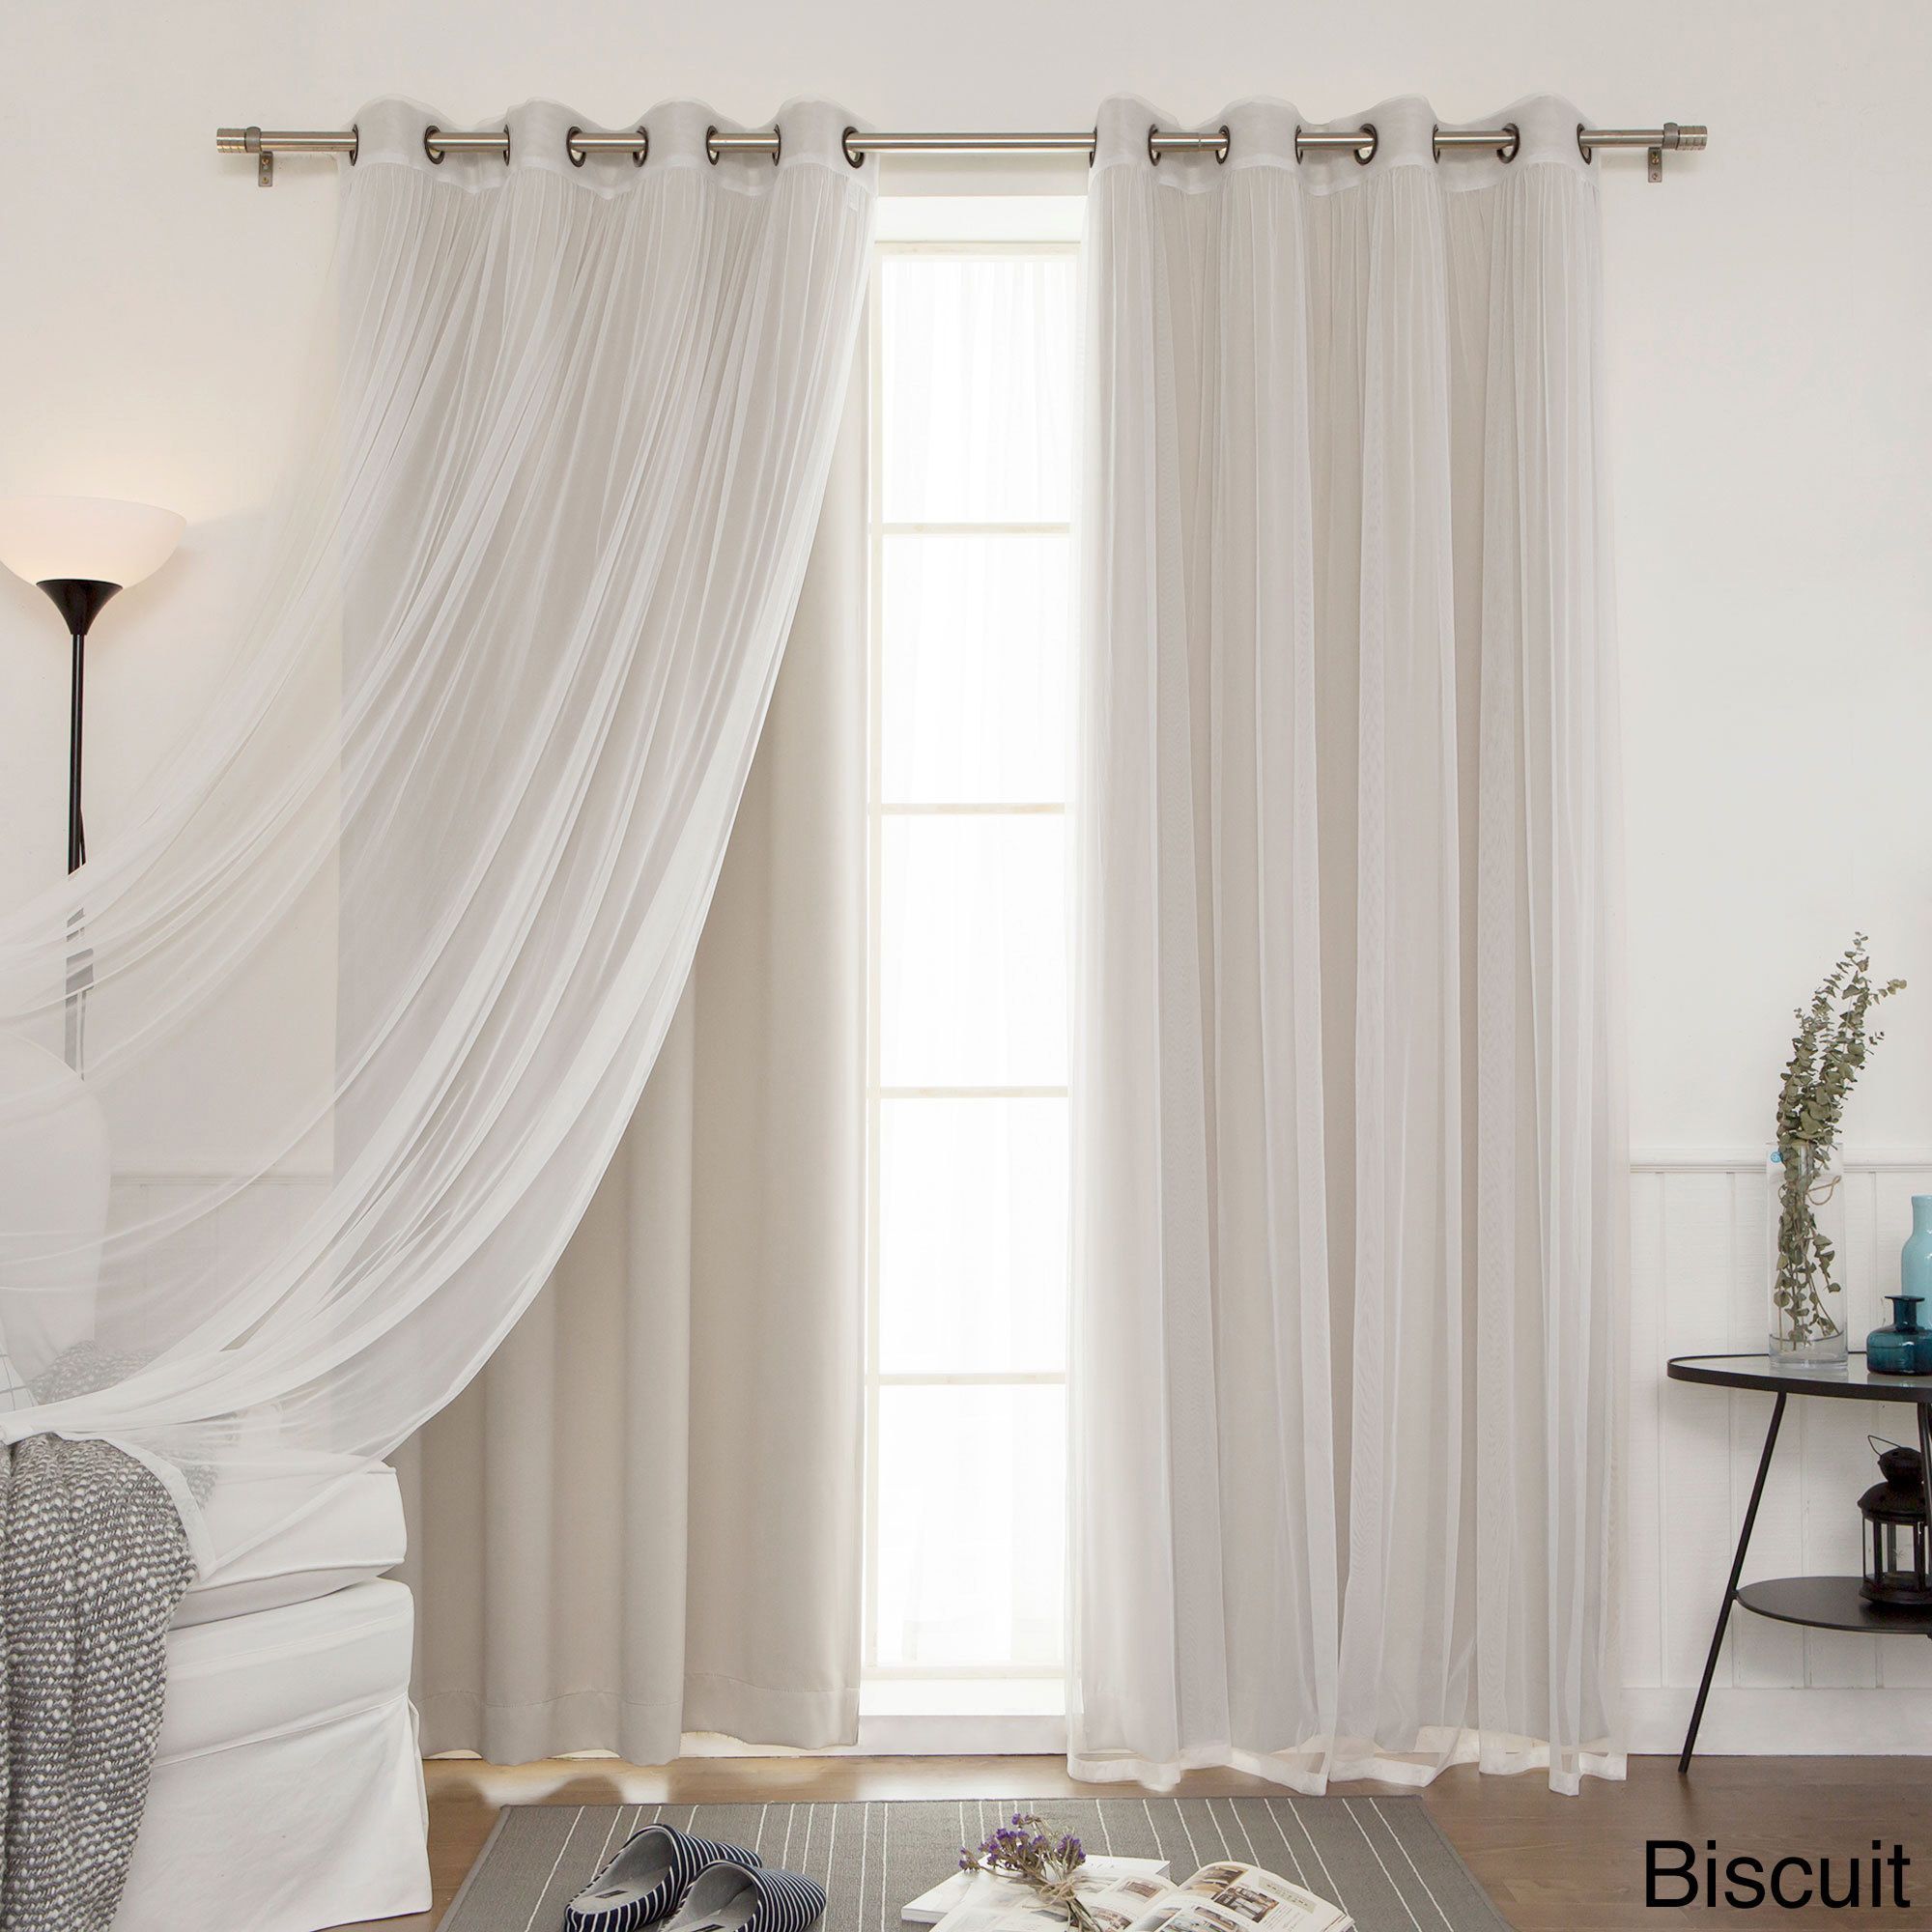 Aurora Home MIX & Match Curtains Blackout and Tulle Lace Sheer 84 ...